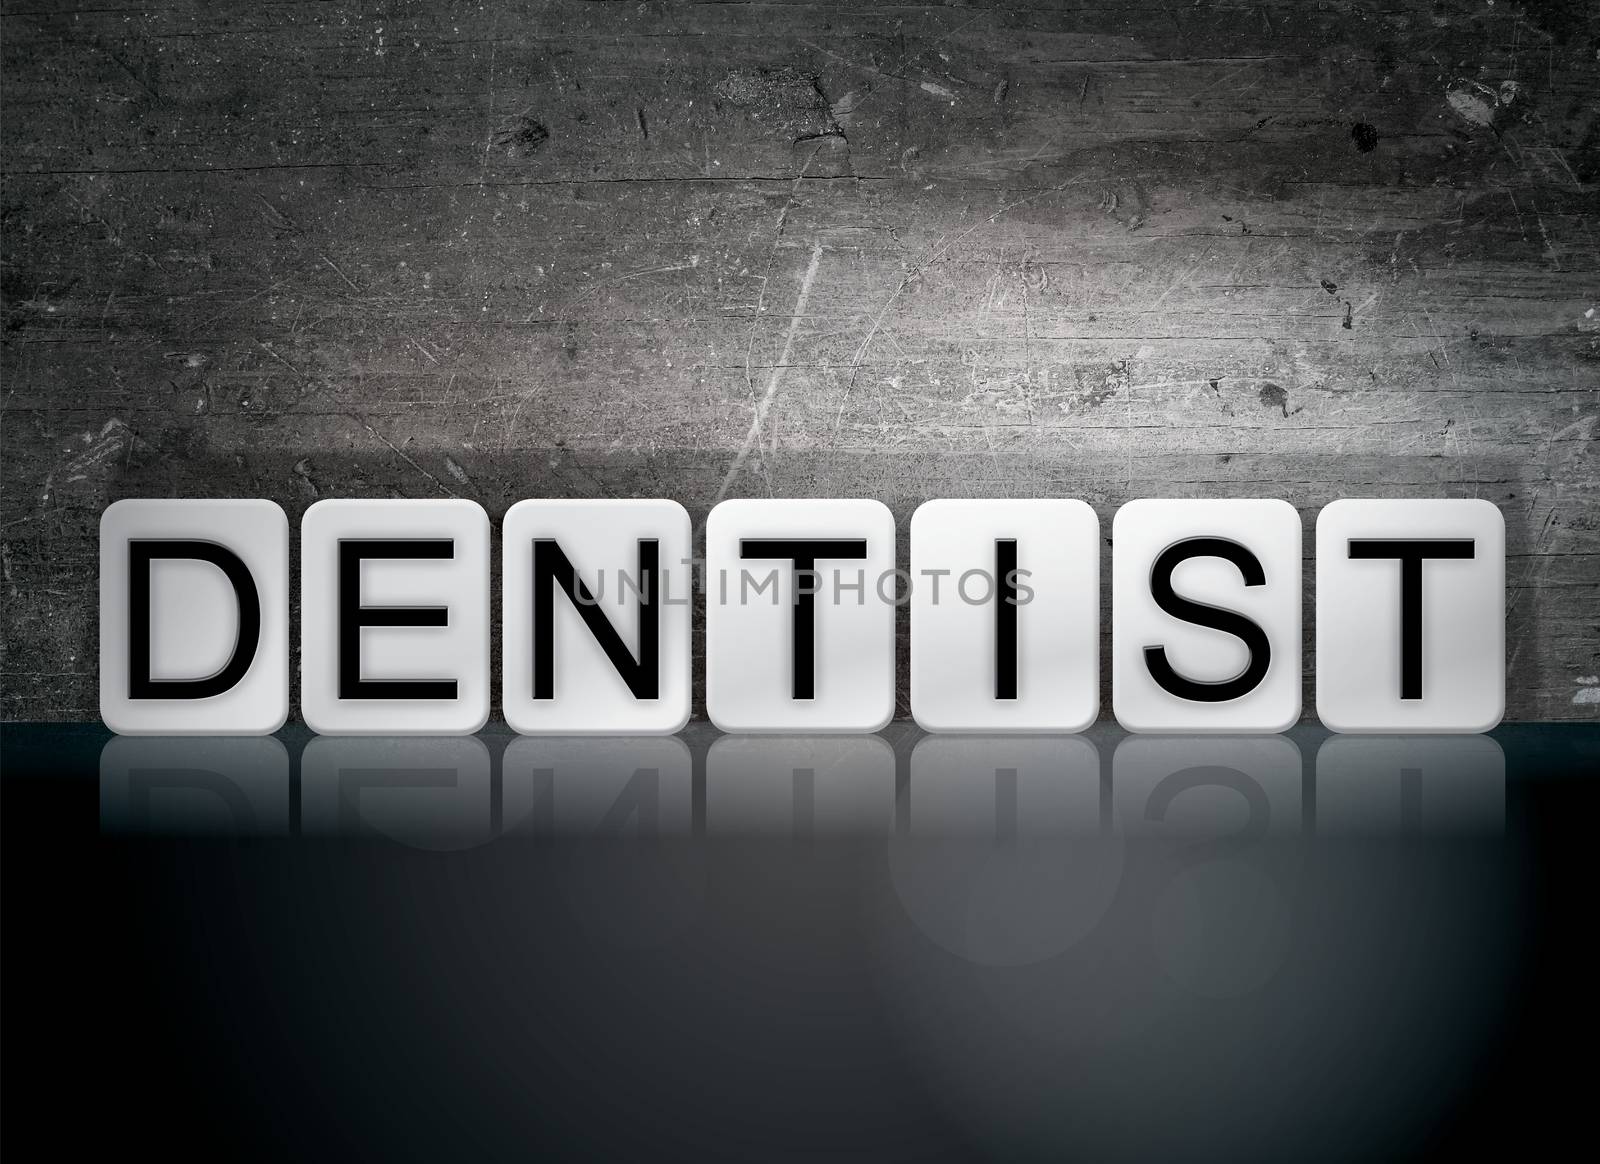 Dentist Tiled Letters Concept and Theme by enterlinedesign